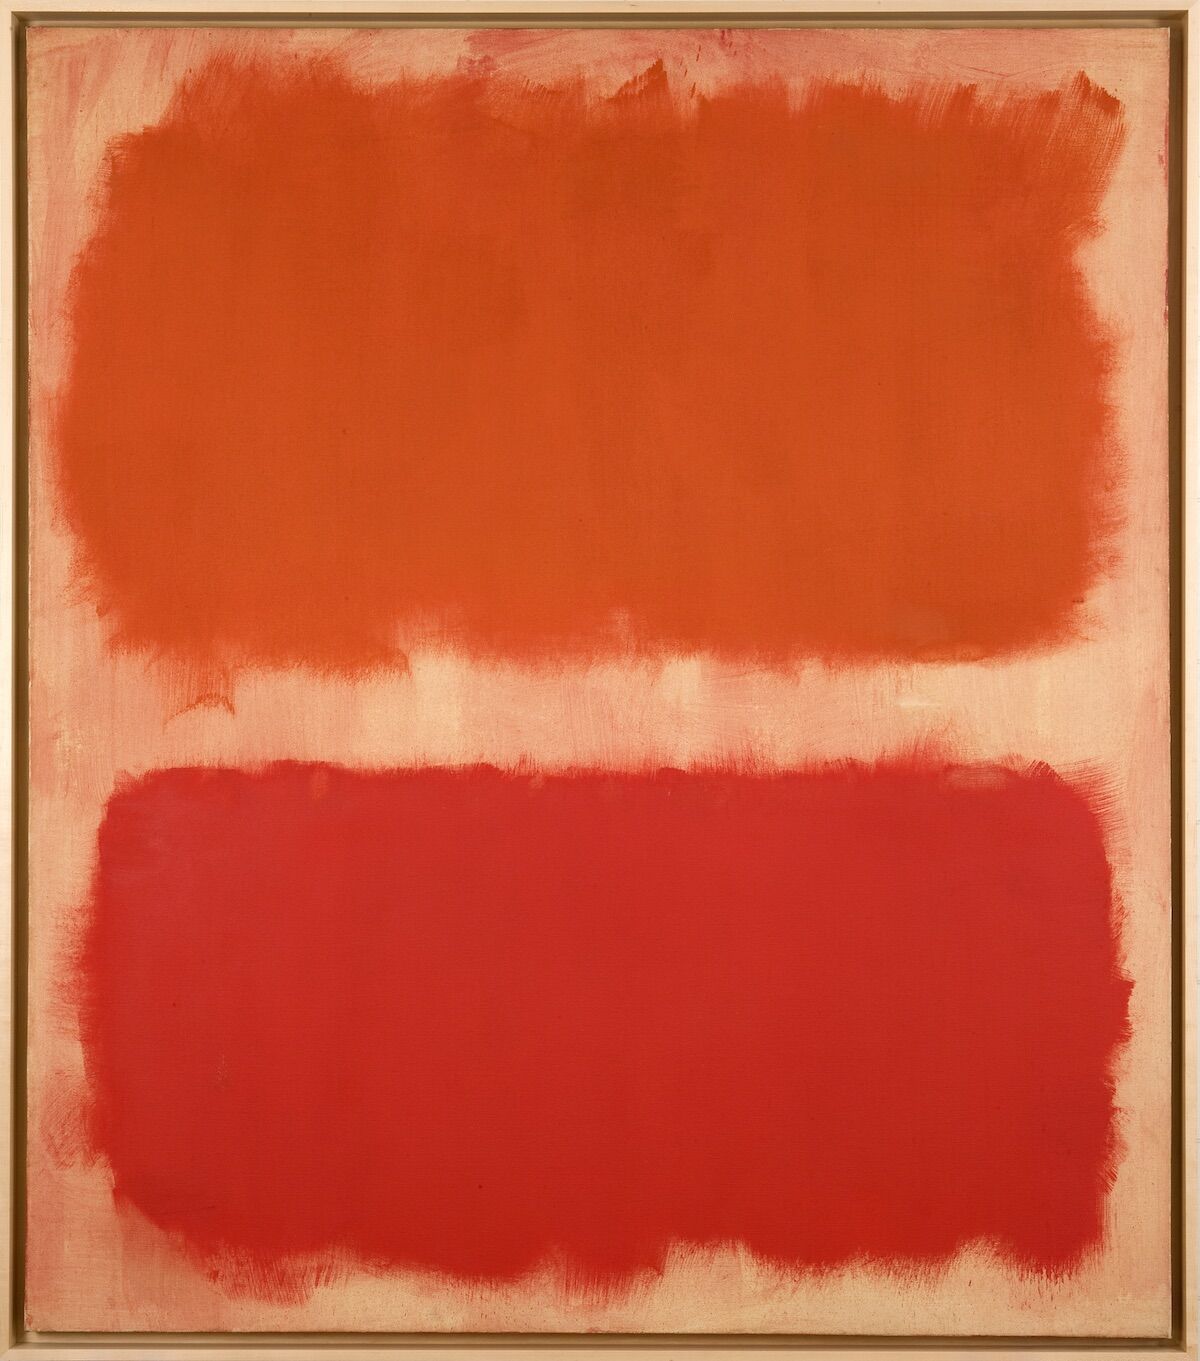 Mark Rothko, Number 22 (reds), 1957. © 2020 Kate Rothko Prizel and Christopher Rothko / ARS, New York. Courtesy the Donald B. Marron Family Collection, Acquavella Galleries, Gagosian, and Pace Gallery. 